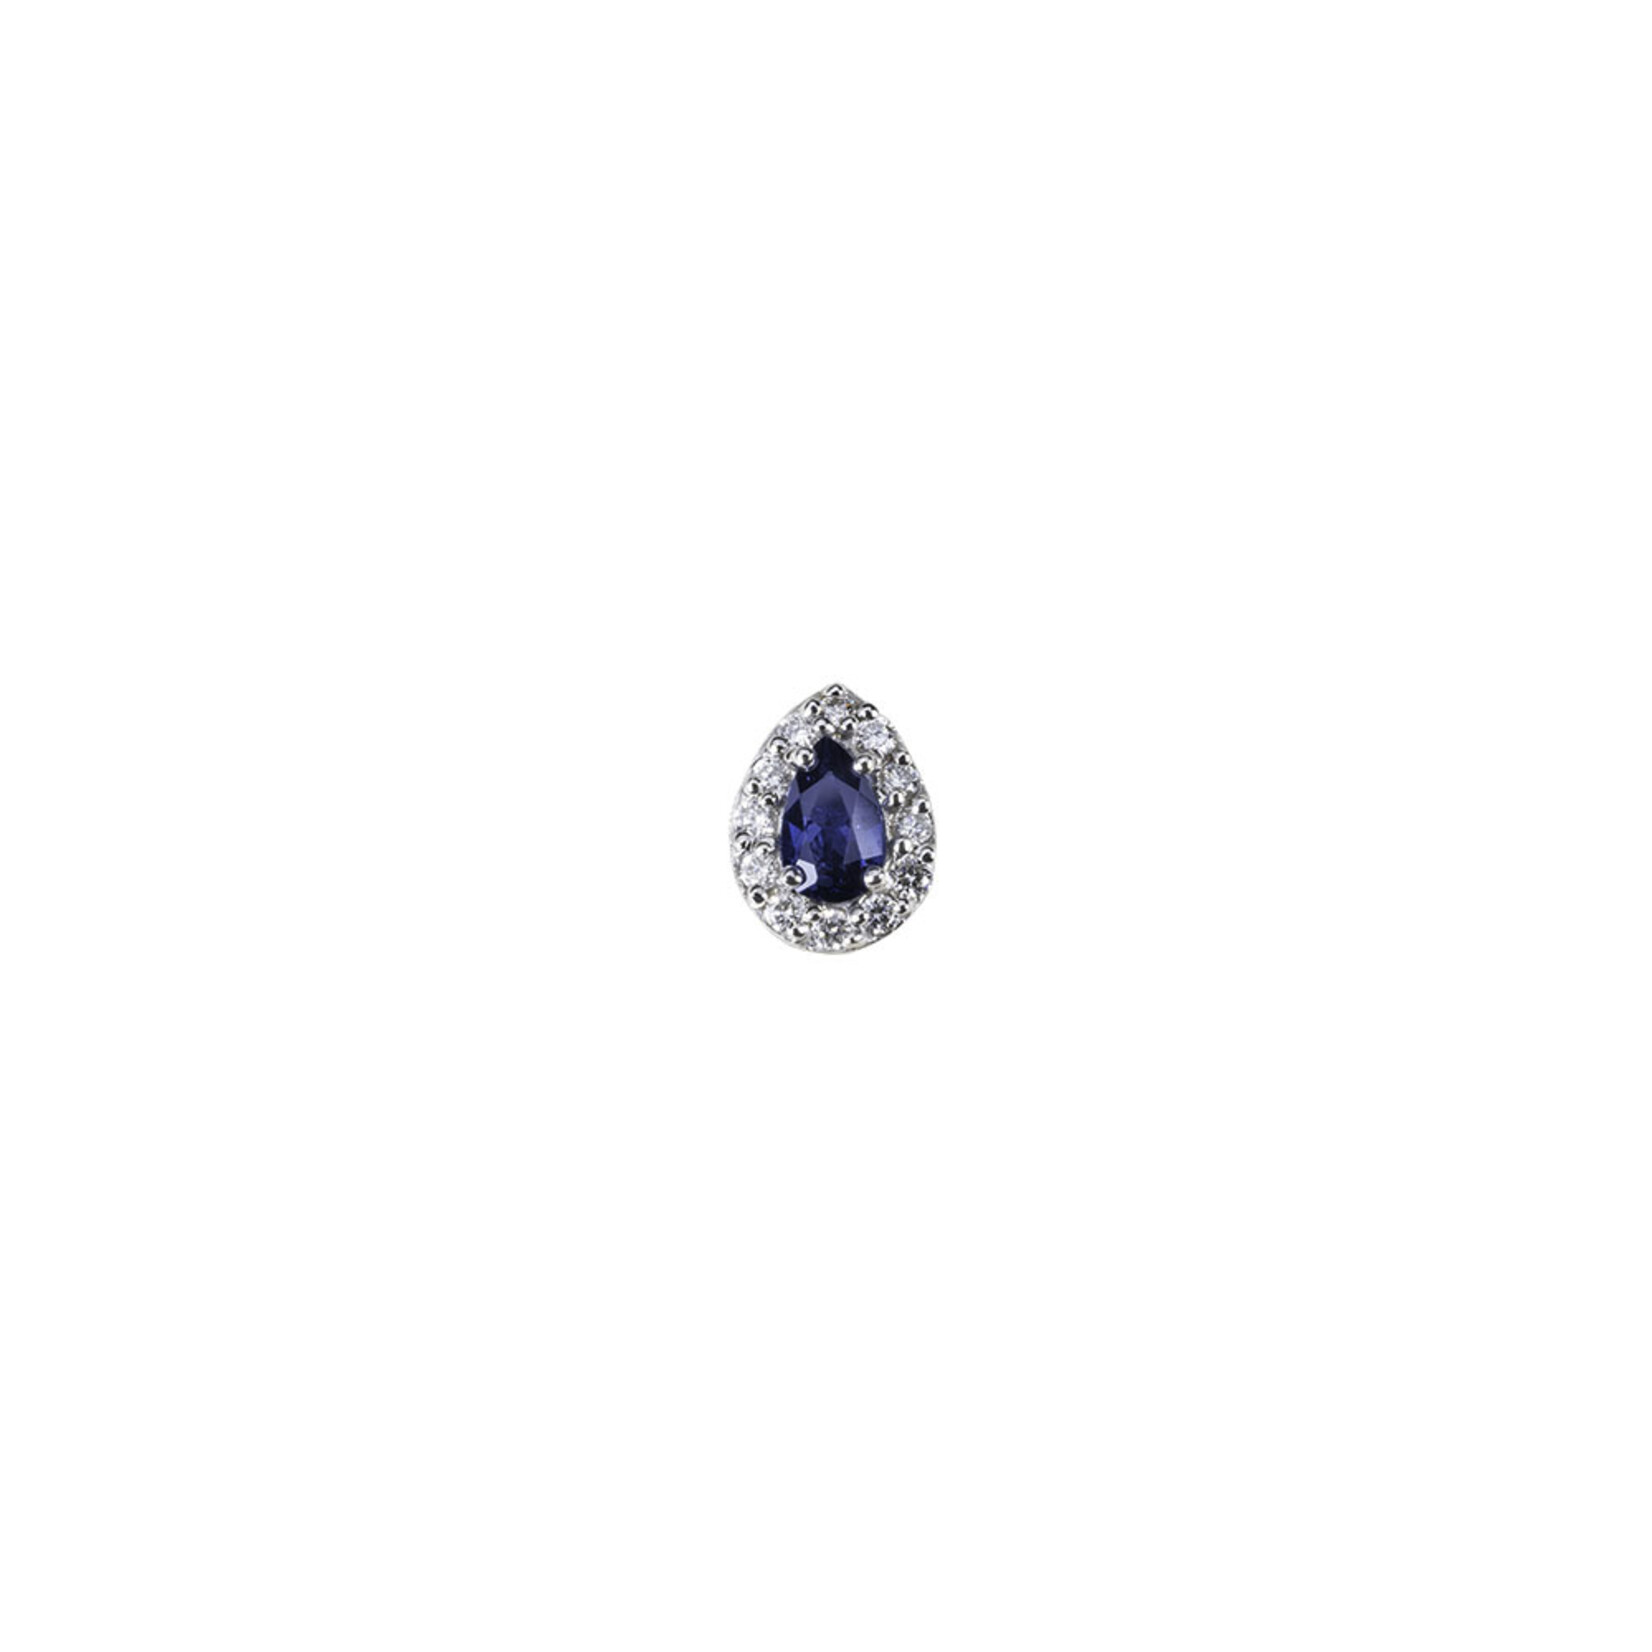 BVLA BVLA "Pear Altura" threaded end with 12x 1.0 VS1 diamond and 4x2.5 AA Sapphire pear